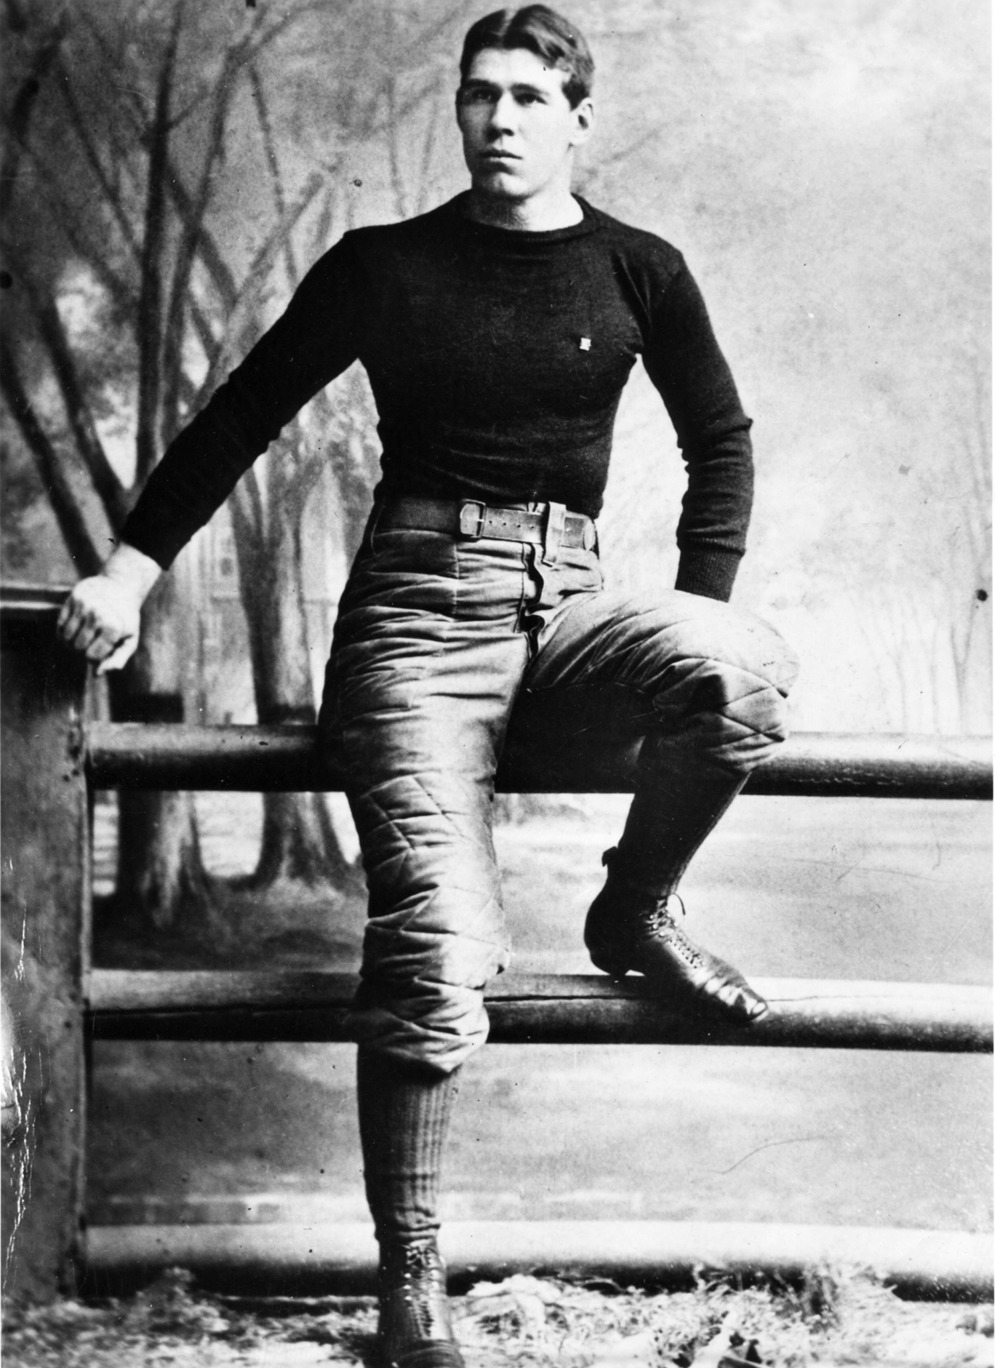 At 6 feet 3 inches tall and 200 pounds, William &#x201C;Pudge&#x201D; Heffelfinger &#x201C;was especially big for that era and towered over his opponents,&#x201D; according to the Pro Football Hall of Fame. (Pro Football Hall of Fame)